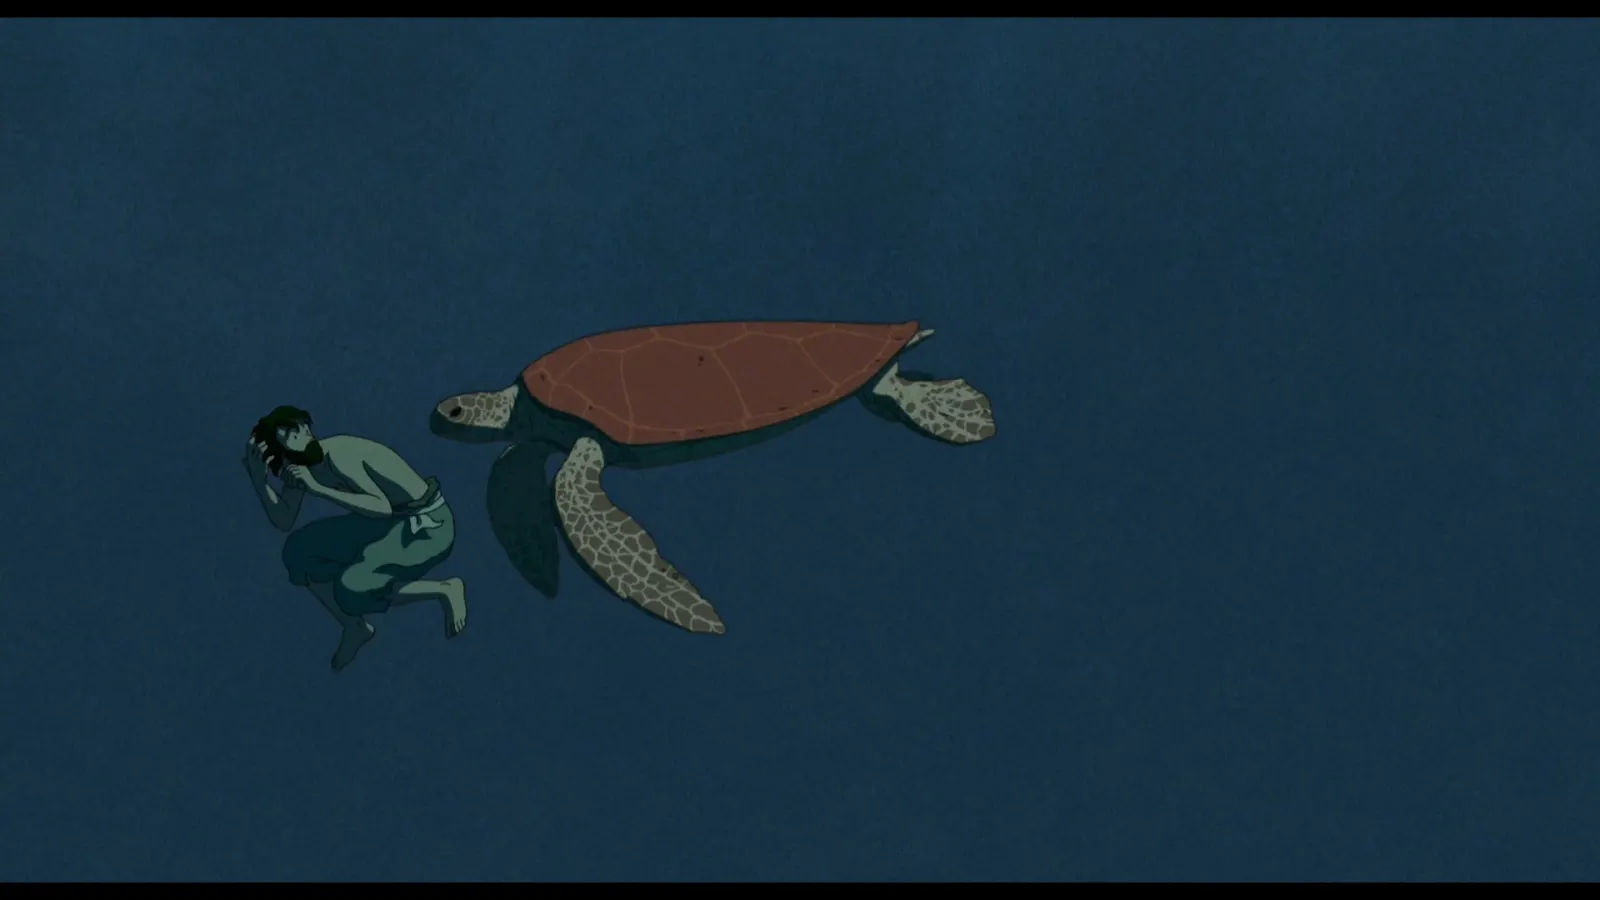 Turtle stares menacingly at man. A timeless love story.